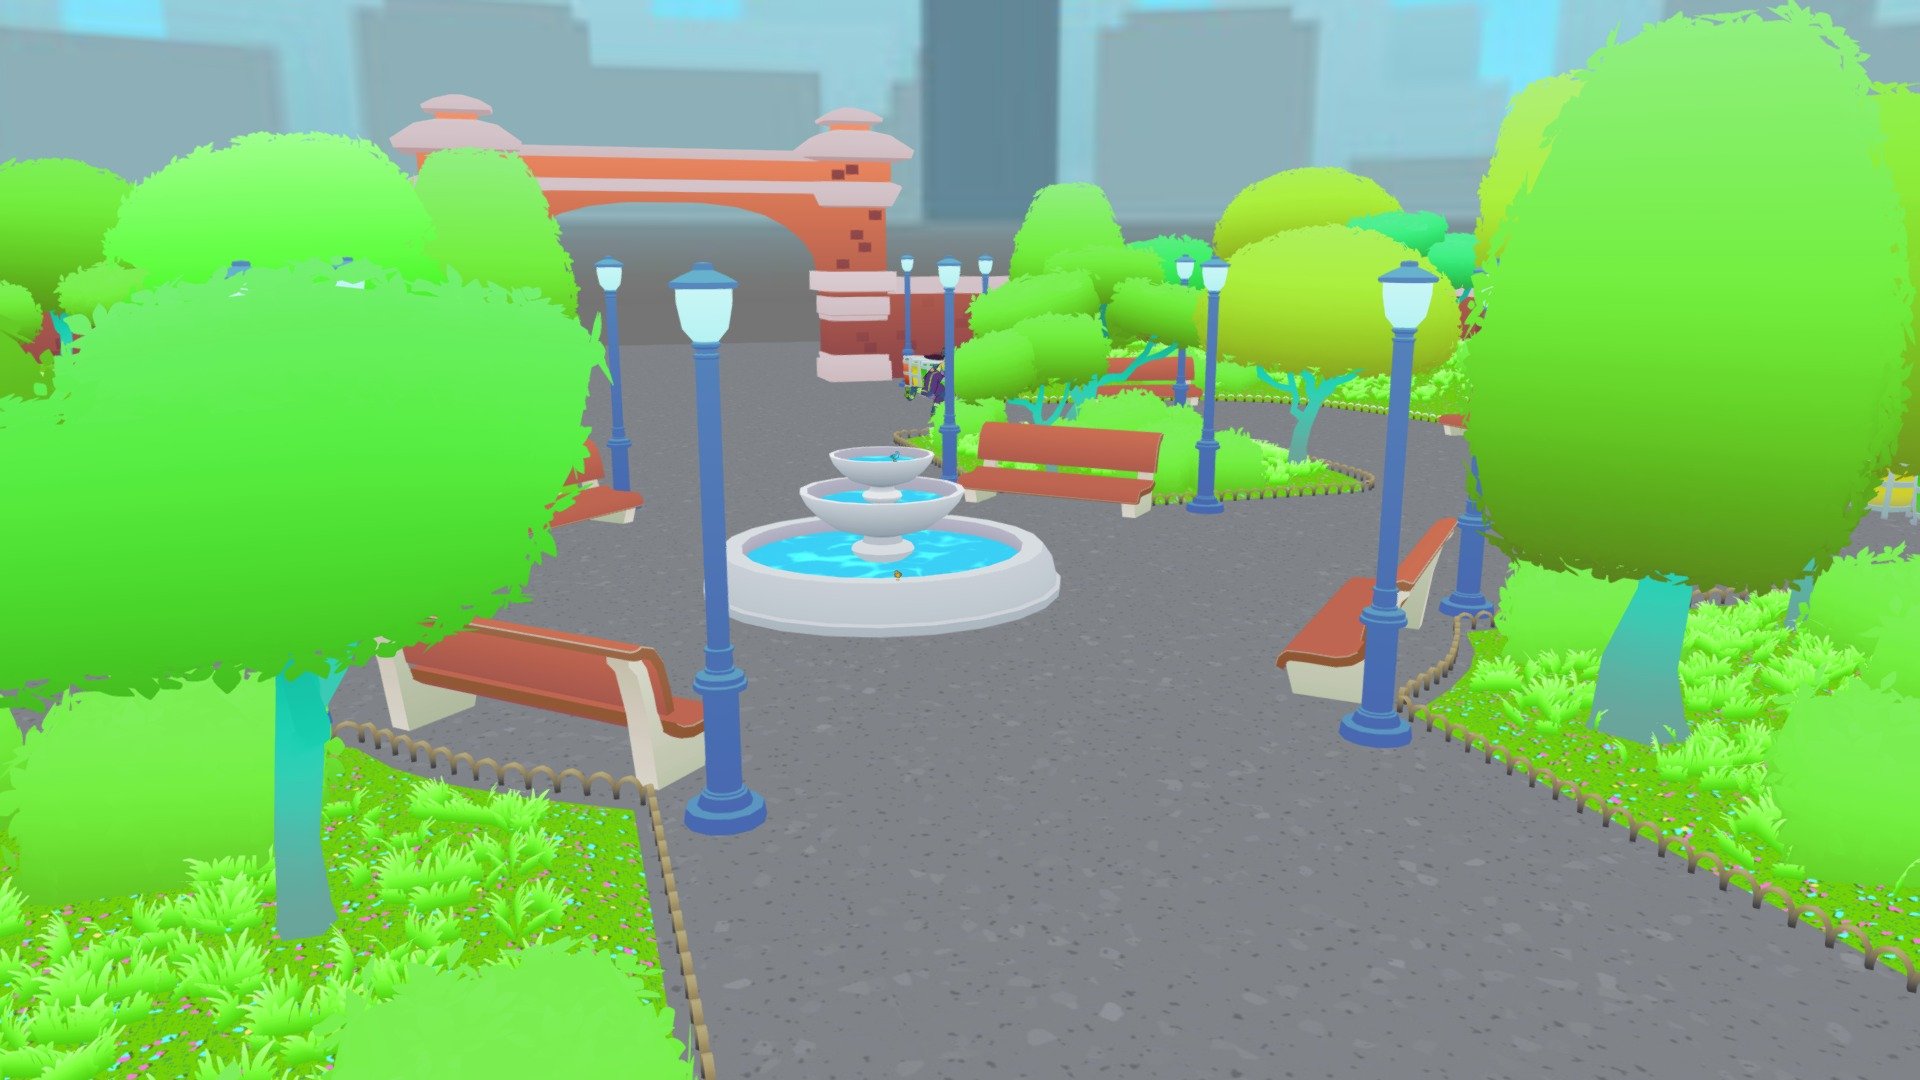 Blender Low Poly scene. with gradient textures and some procedural textures made in Blender. Like the grass, water and the floor.
I baked it to put here on Sketchfab.

https://www.behance.net/gallery/132172983/Roller-Blades-Girl
here some prints, wireframes and the original video of the animation 3d model